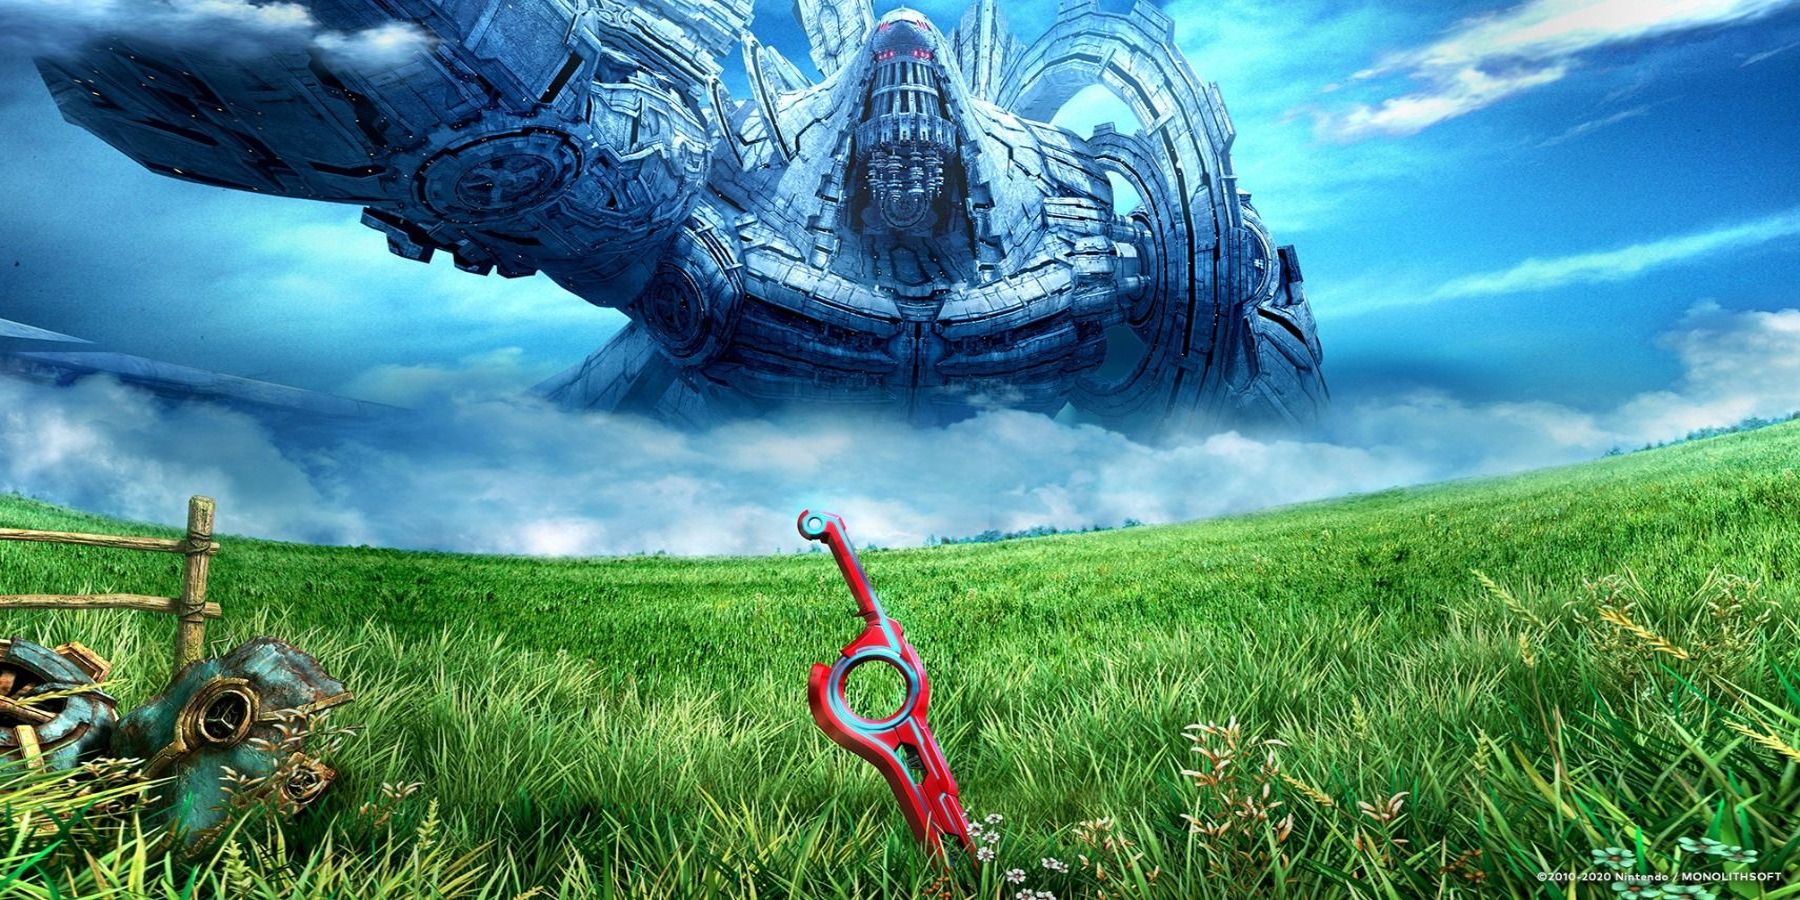 Artwork from the Xenoblade Chronicles JRPG video game series.